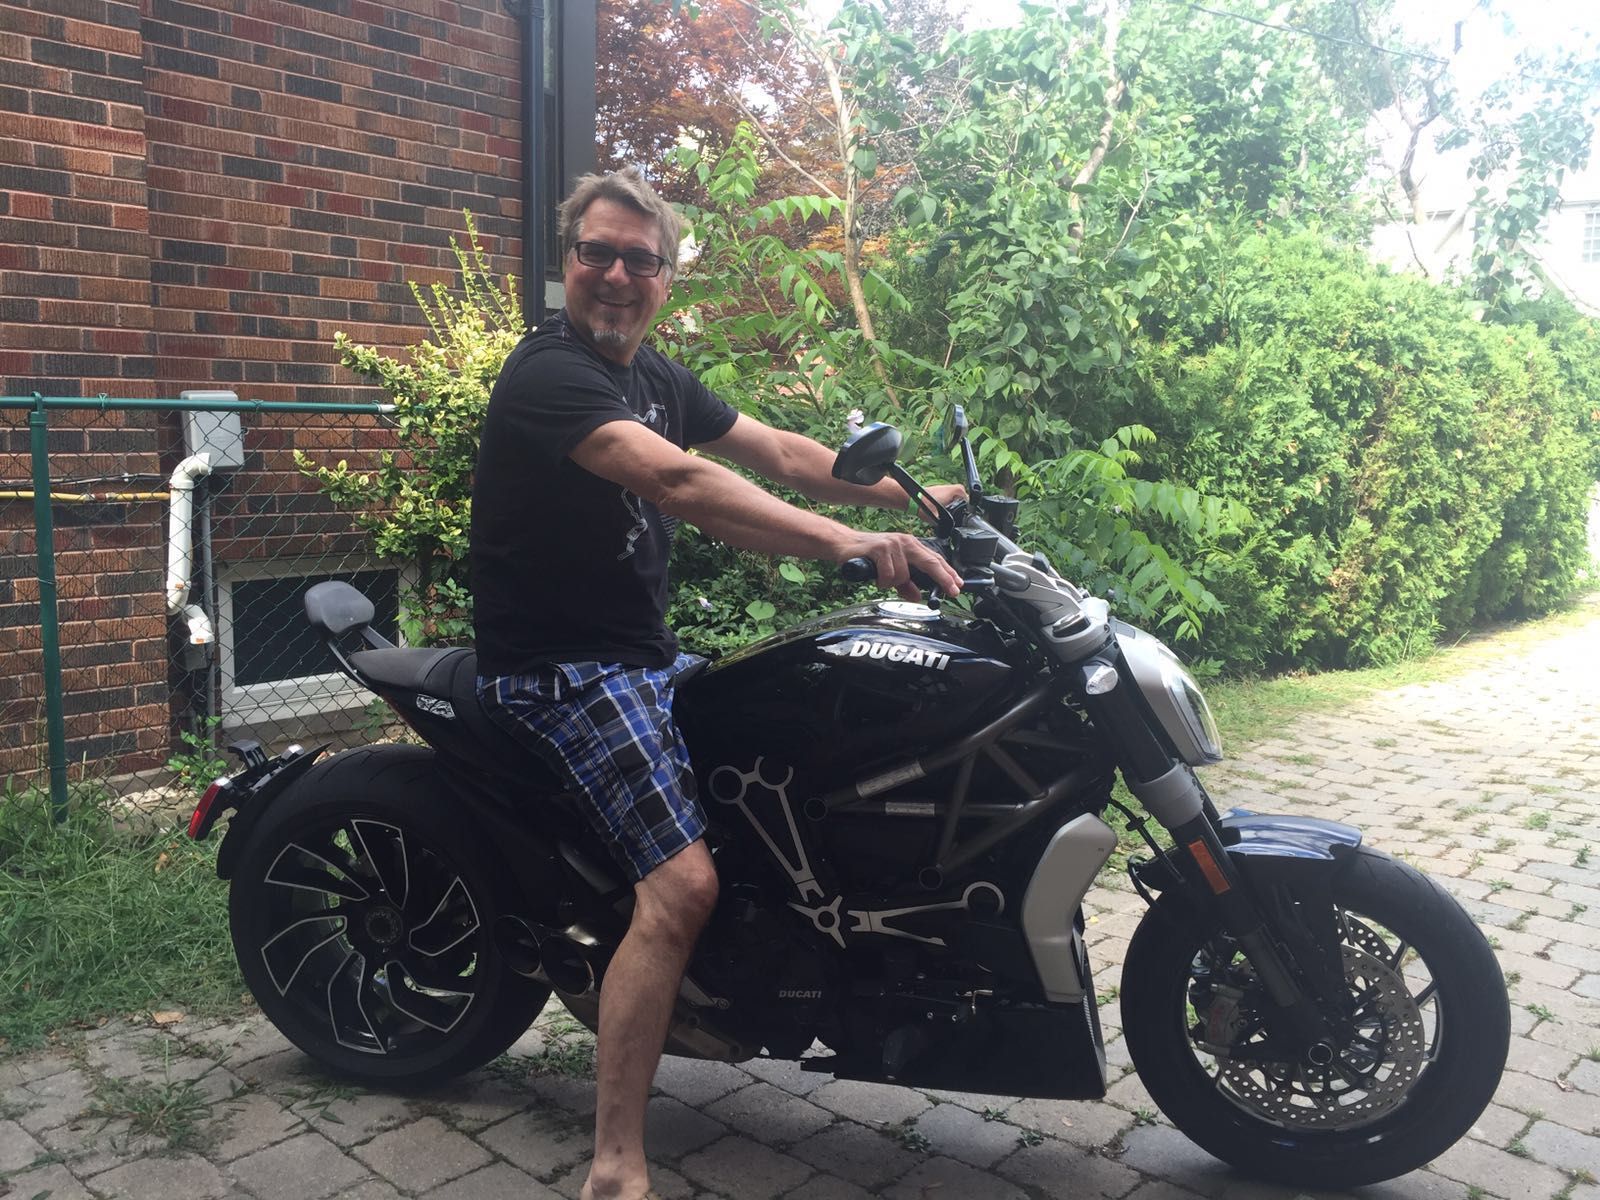 Author runnin' with the Diavel